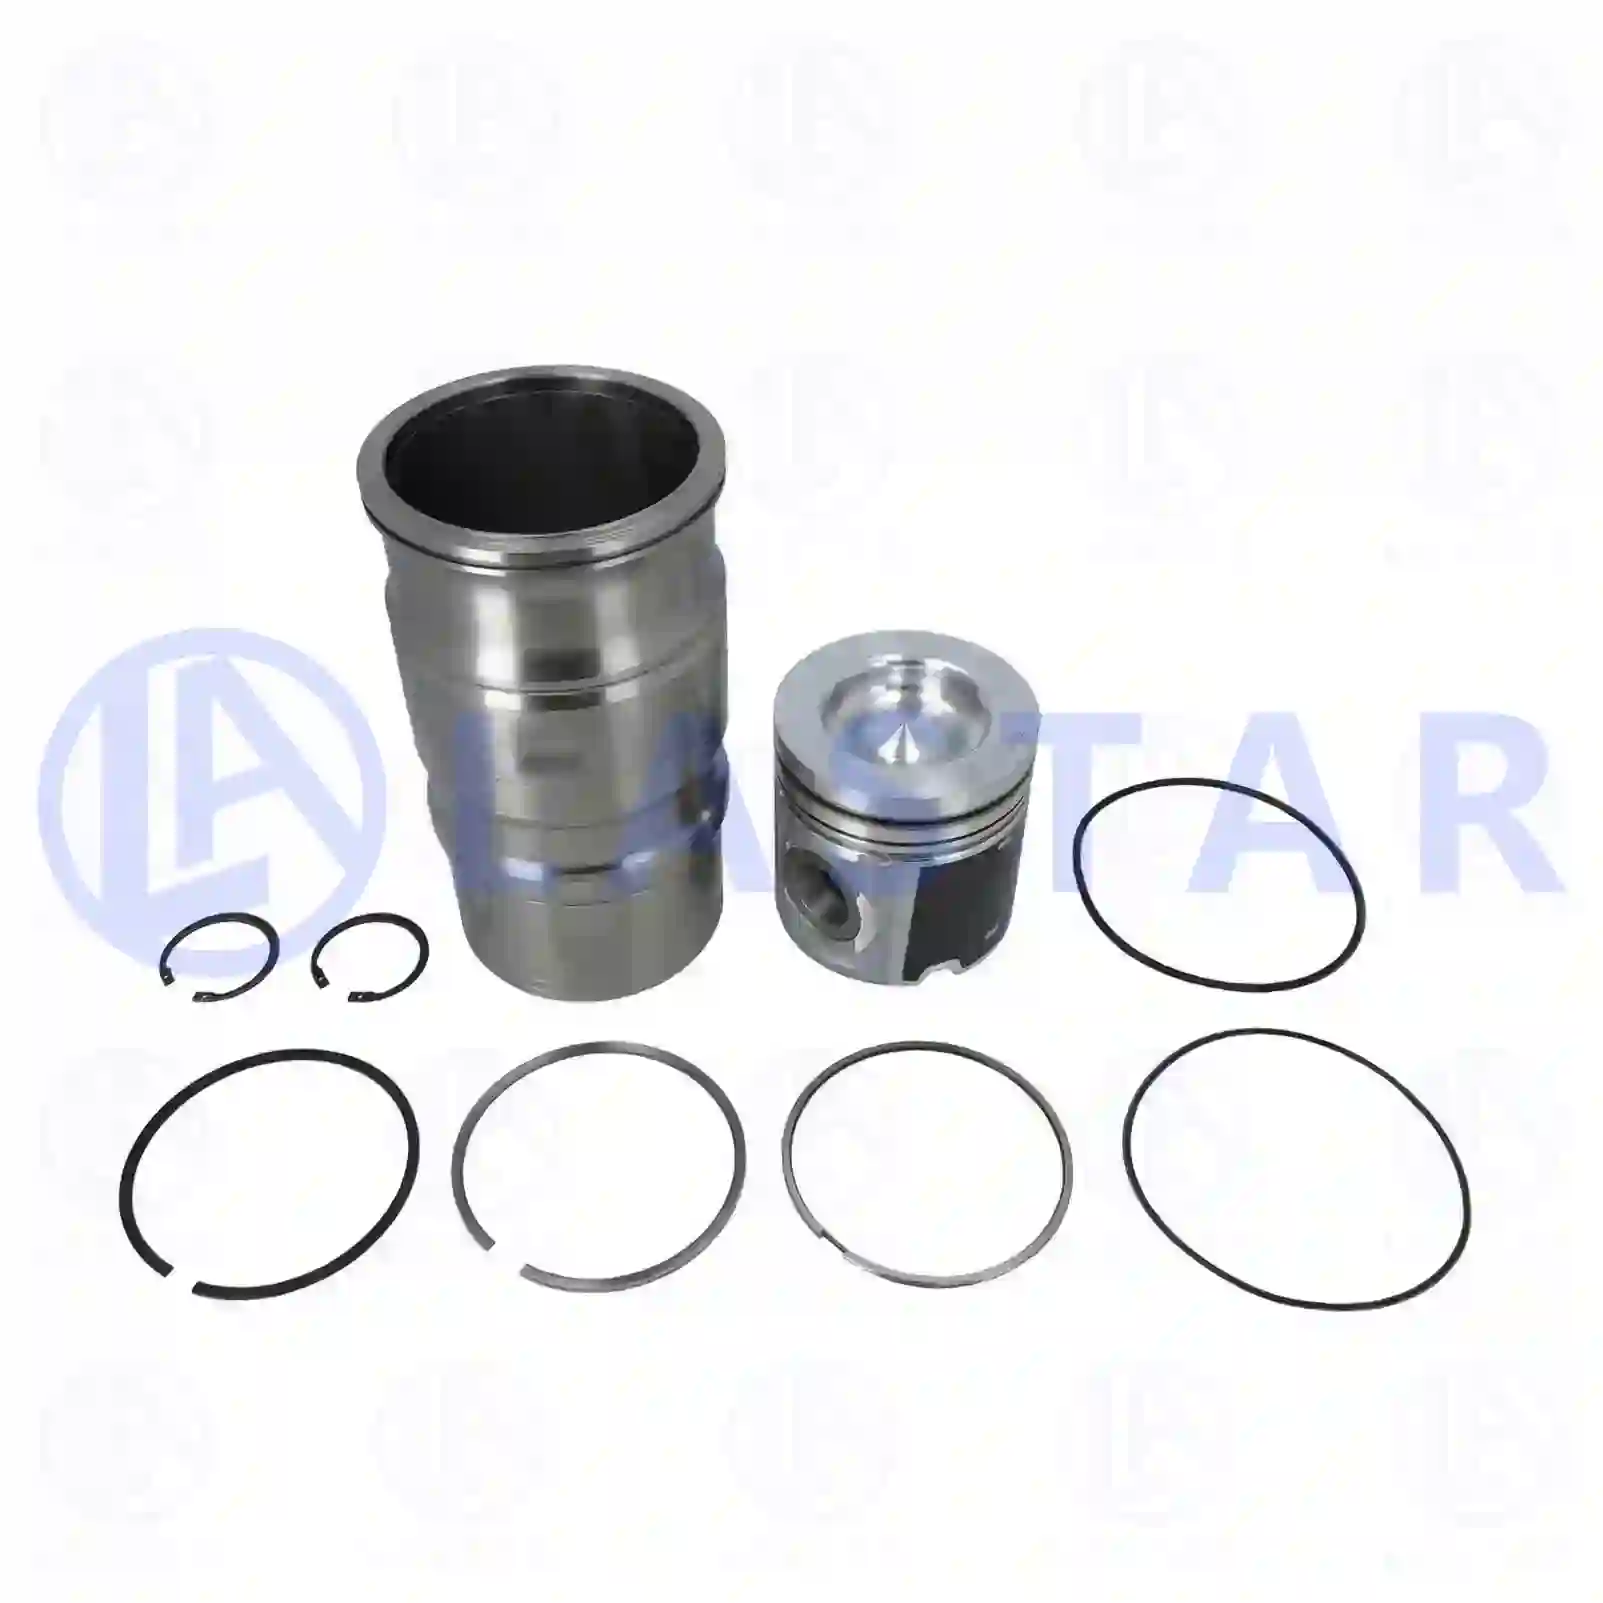 Piston with liner, 77704759, 1549776, 2040852, 2672397, 549776, 551348, 551349, 551353, 551374, ZG01896-0008 ||  77704759 Lastar Spare Part | Truck Spare Parts, Auotomotive Spare Parts Piston with liner, 77704759, 1549776, 2040852, 2672397, 549776, 551348, 551349, 551353, 551374, ZG01896-0008 ||  77704759 Lastar Spare Part | Truck Spare Parts, Auotomotive Spare Parts